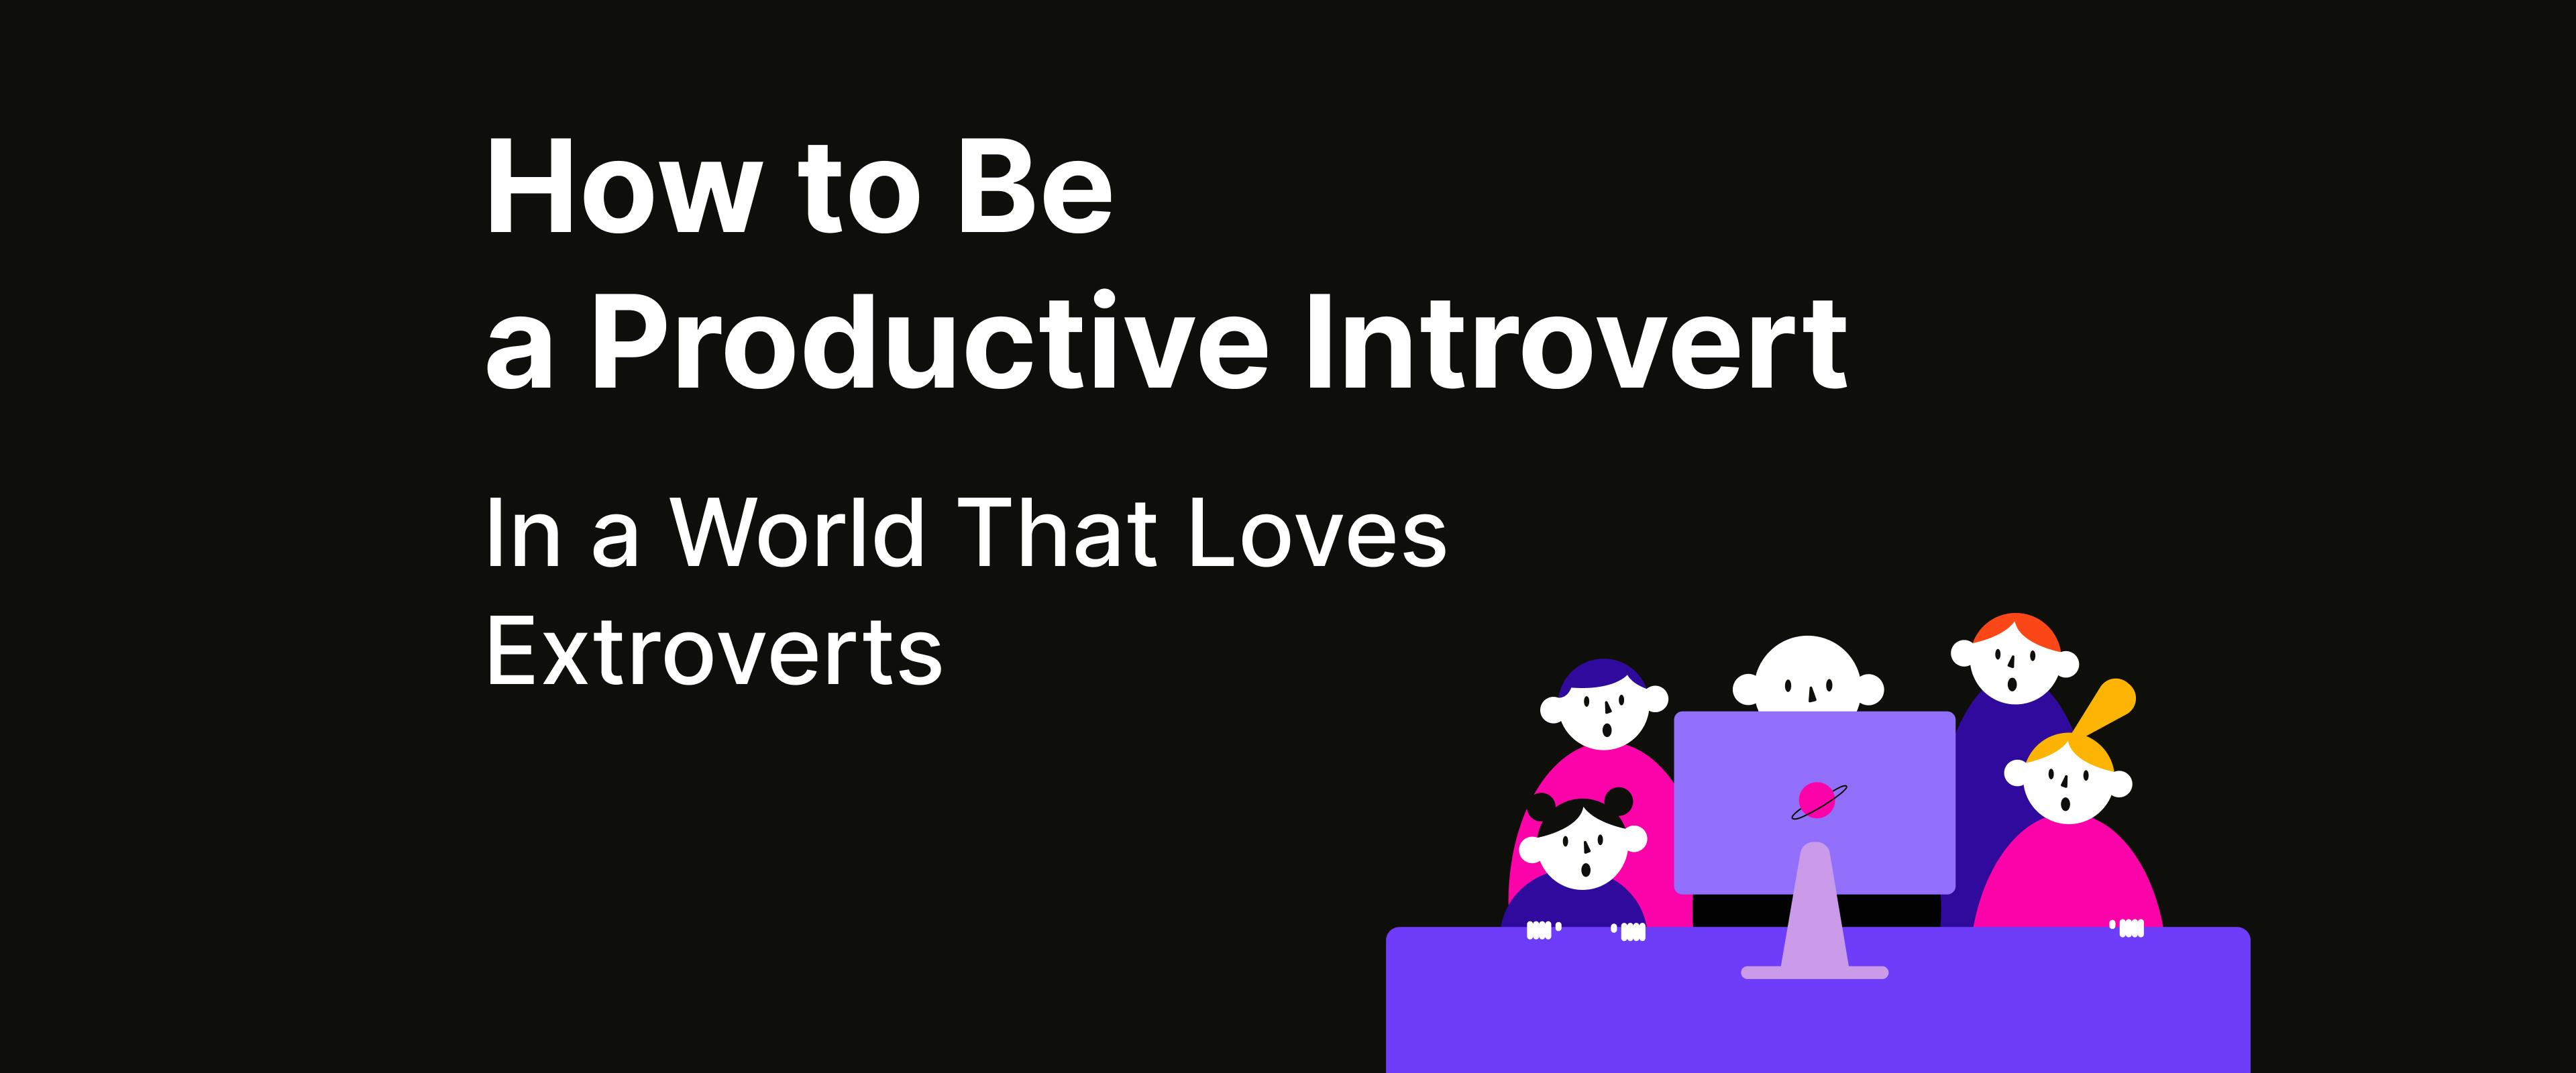 How to Be a Productive Introvert - Headway App